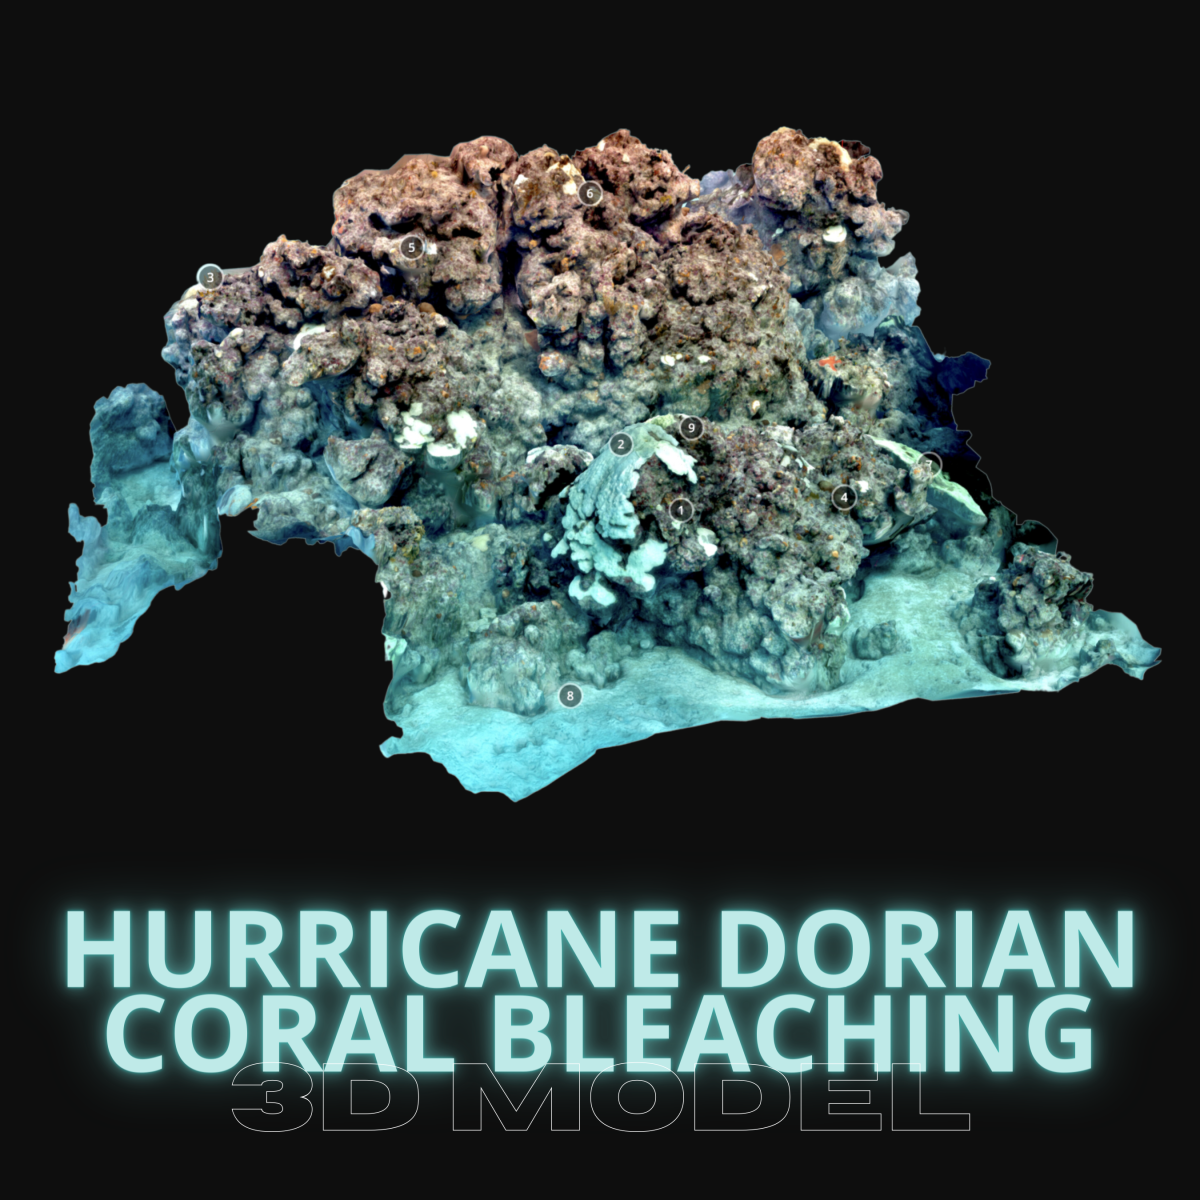 Perry Institute for Marine Science's Hurricane Dorian Coral Bleaching 3D Model